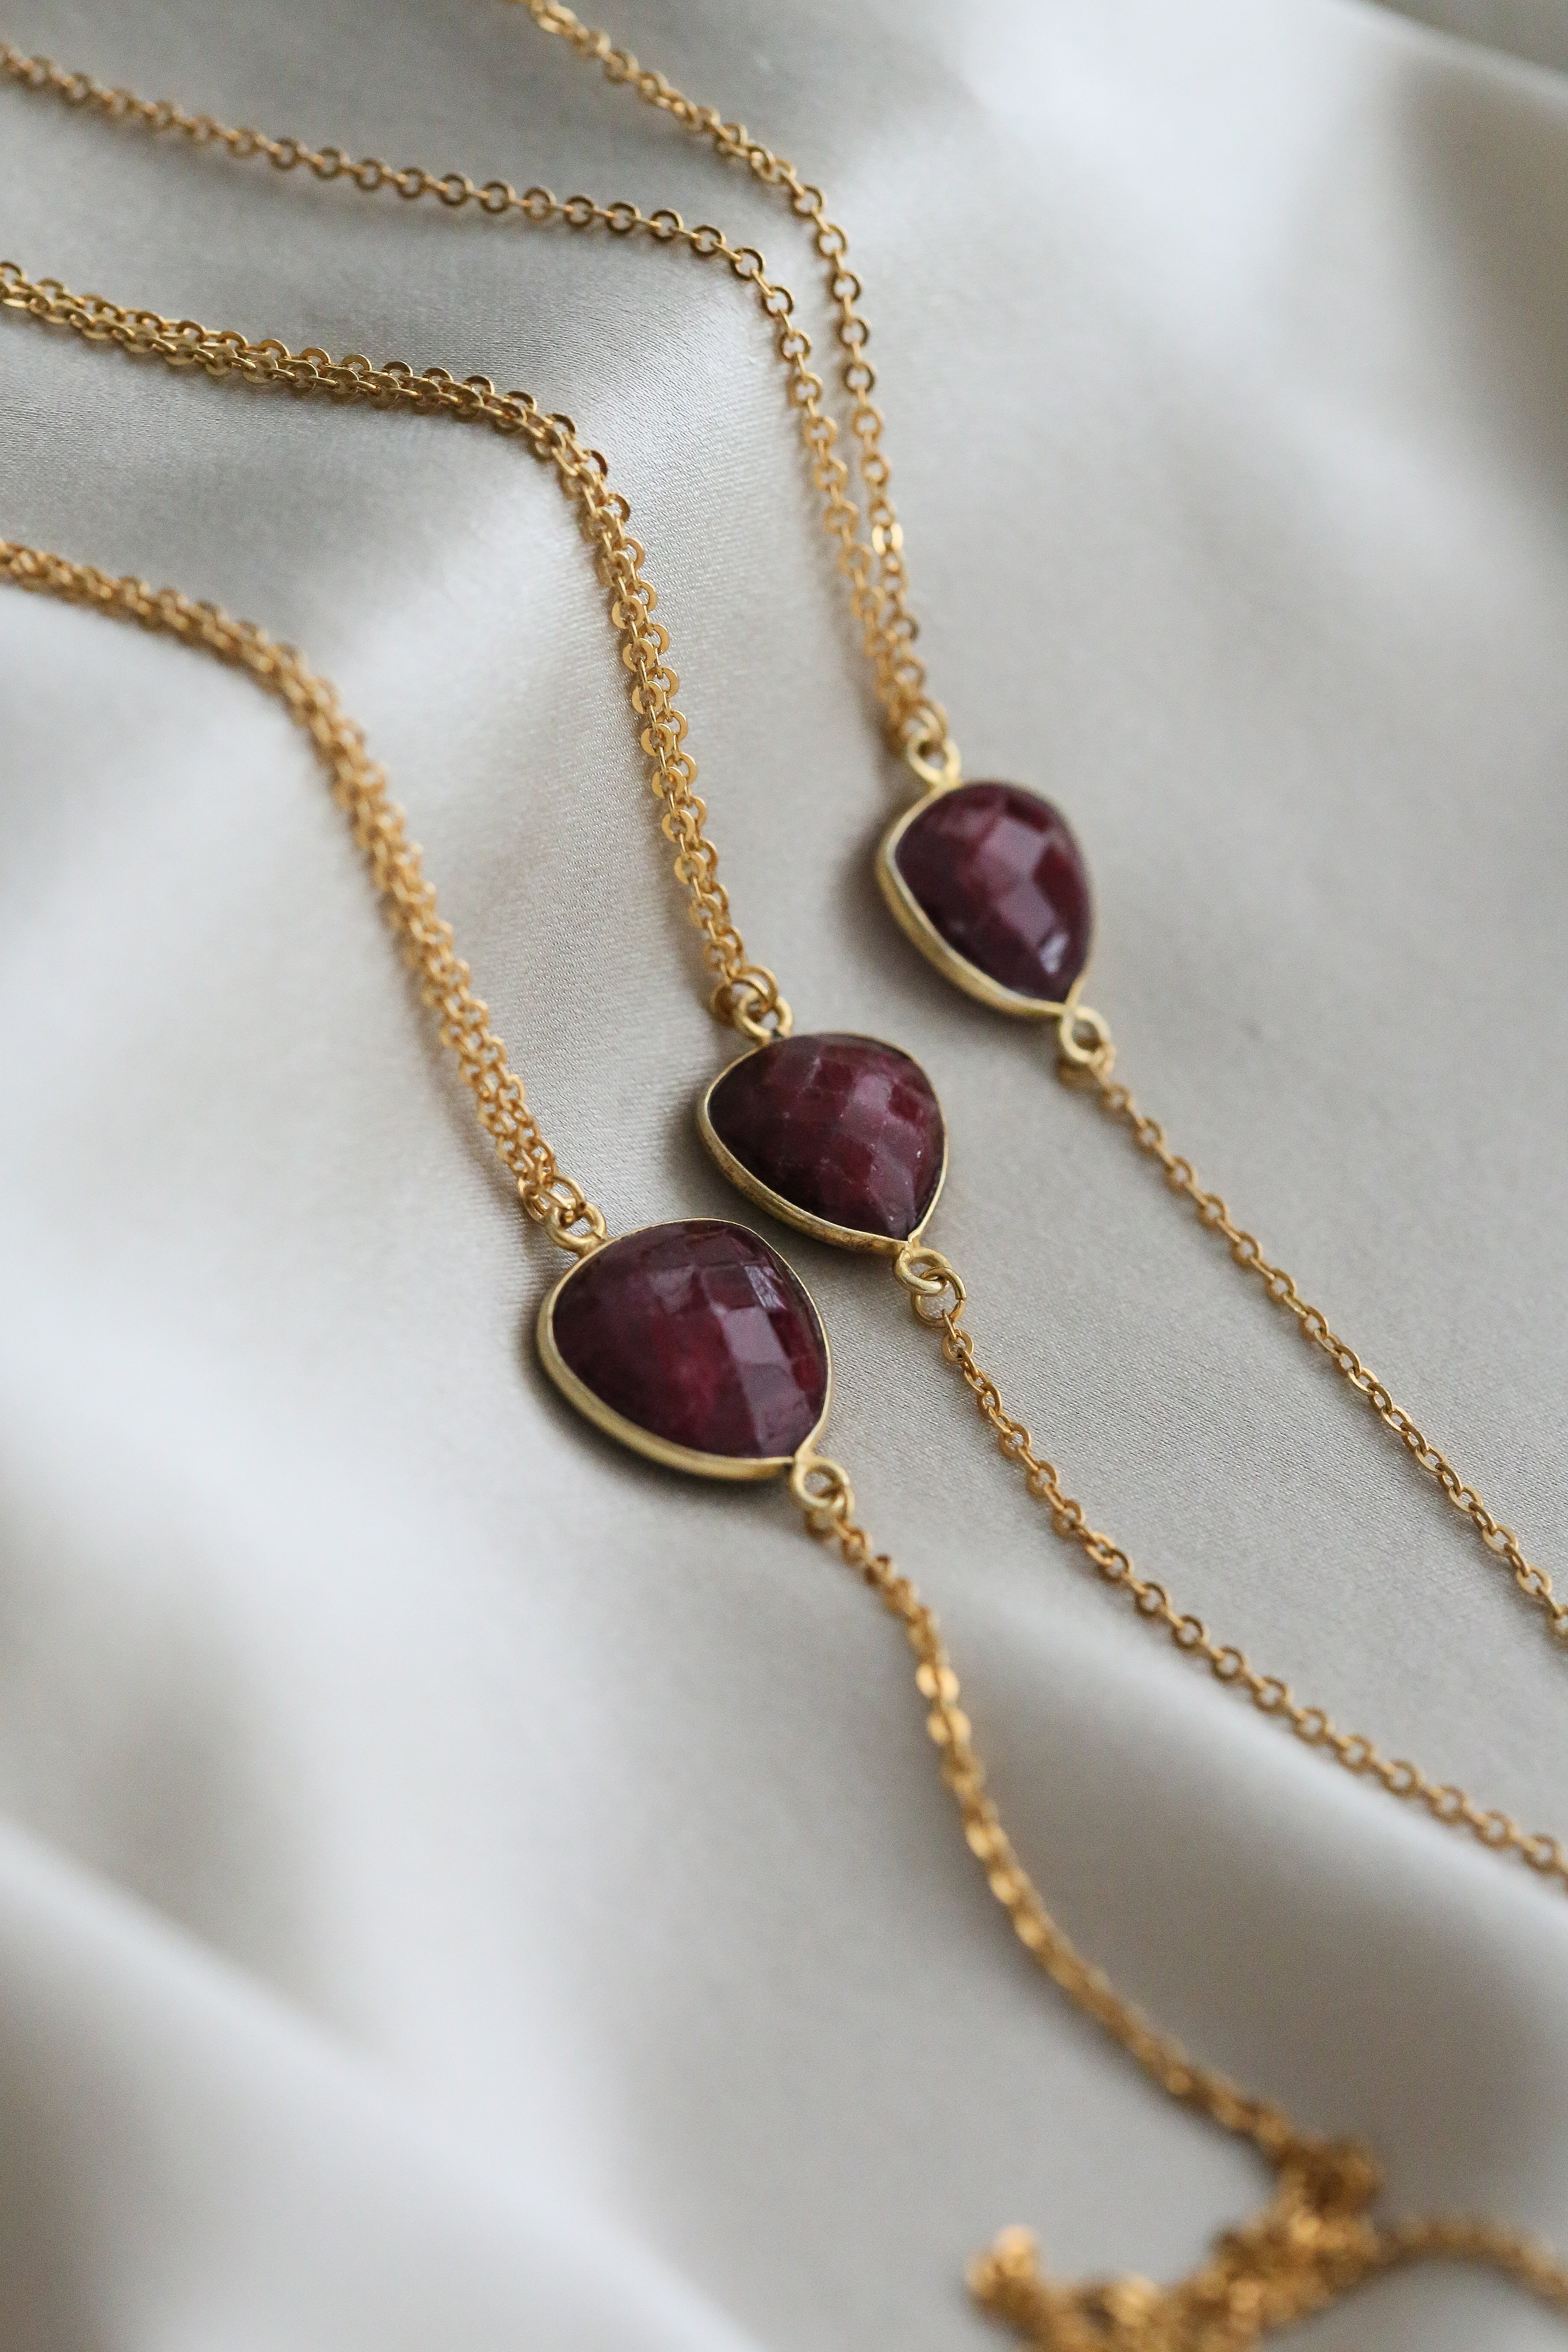 Precious Stones Lariat Necklaces - Boutique Minimaliste has waterproof, durable, elegant and vintage inspired jewelry